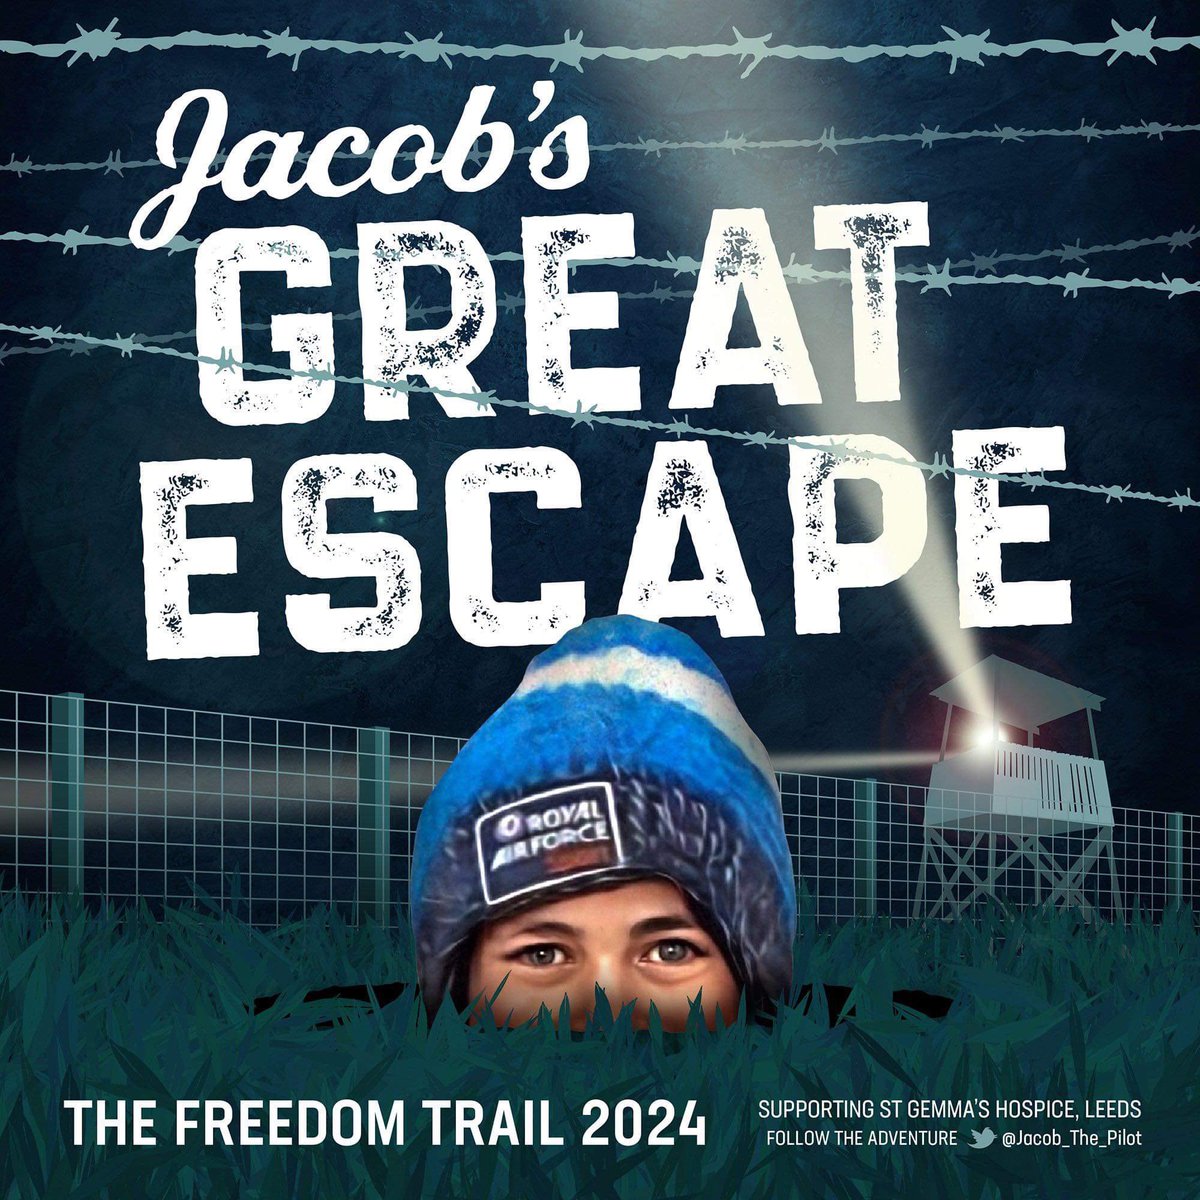 @AffinityFts Amazing - did you know I’m trekking across the Pyrenees following in the footsteps of one of ‘The Great Escapers’ that made it home this year for charity? 
#TGE80 #TheGreatEscape80